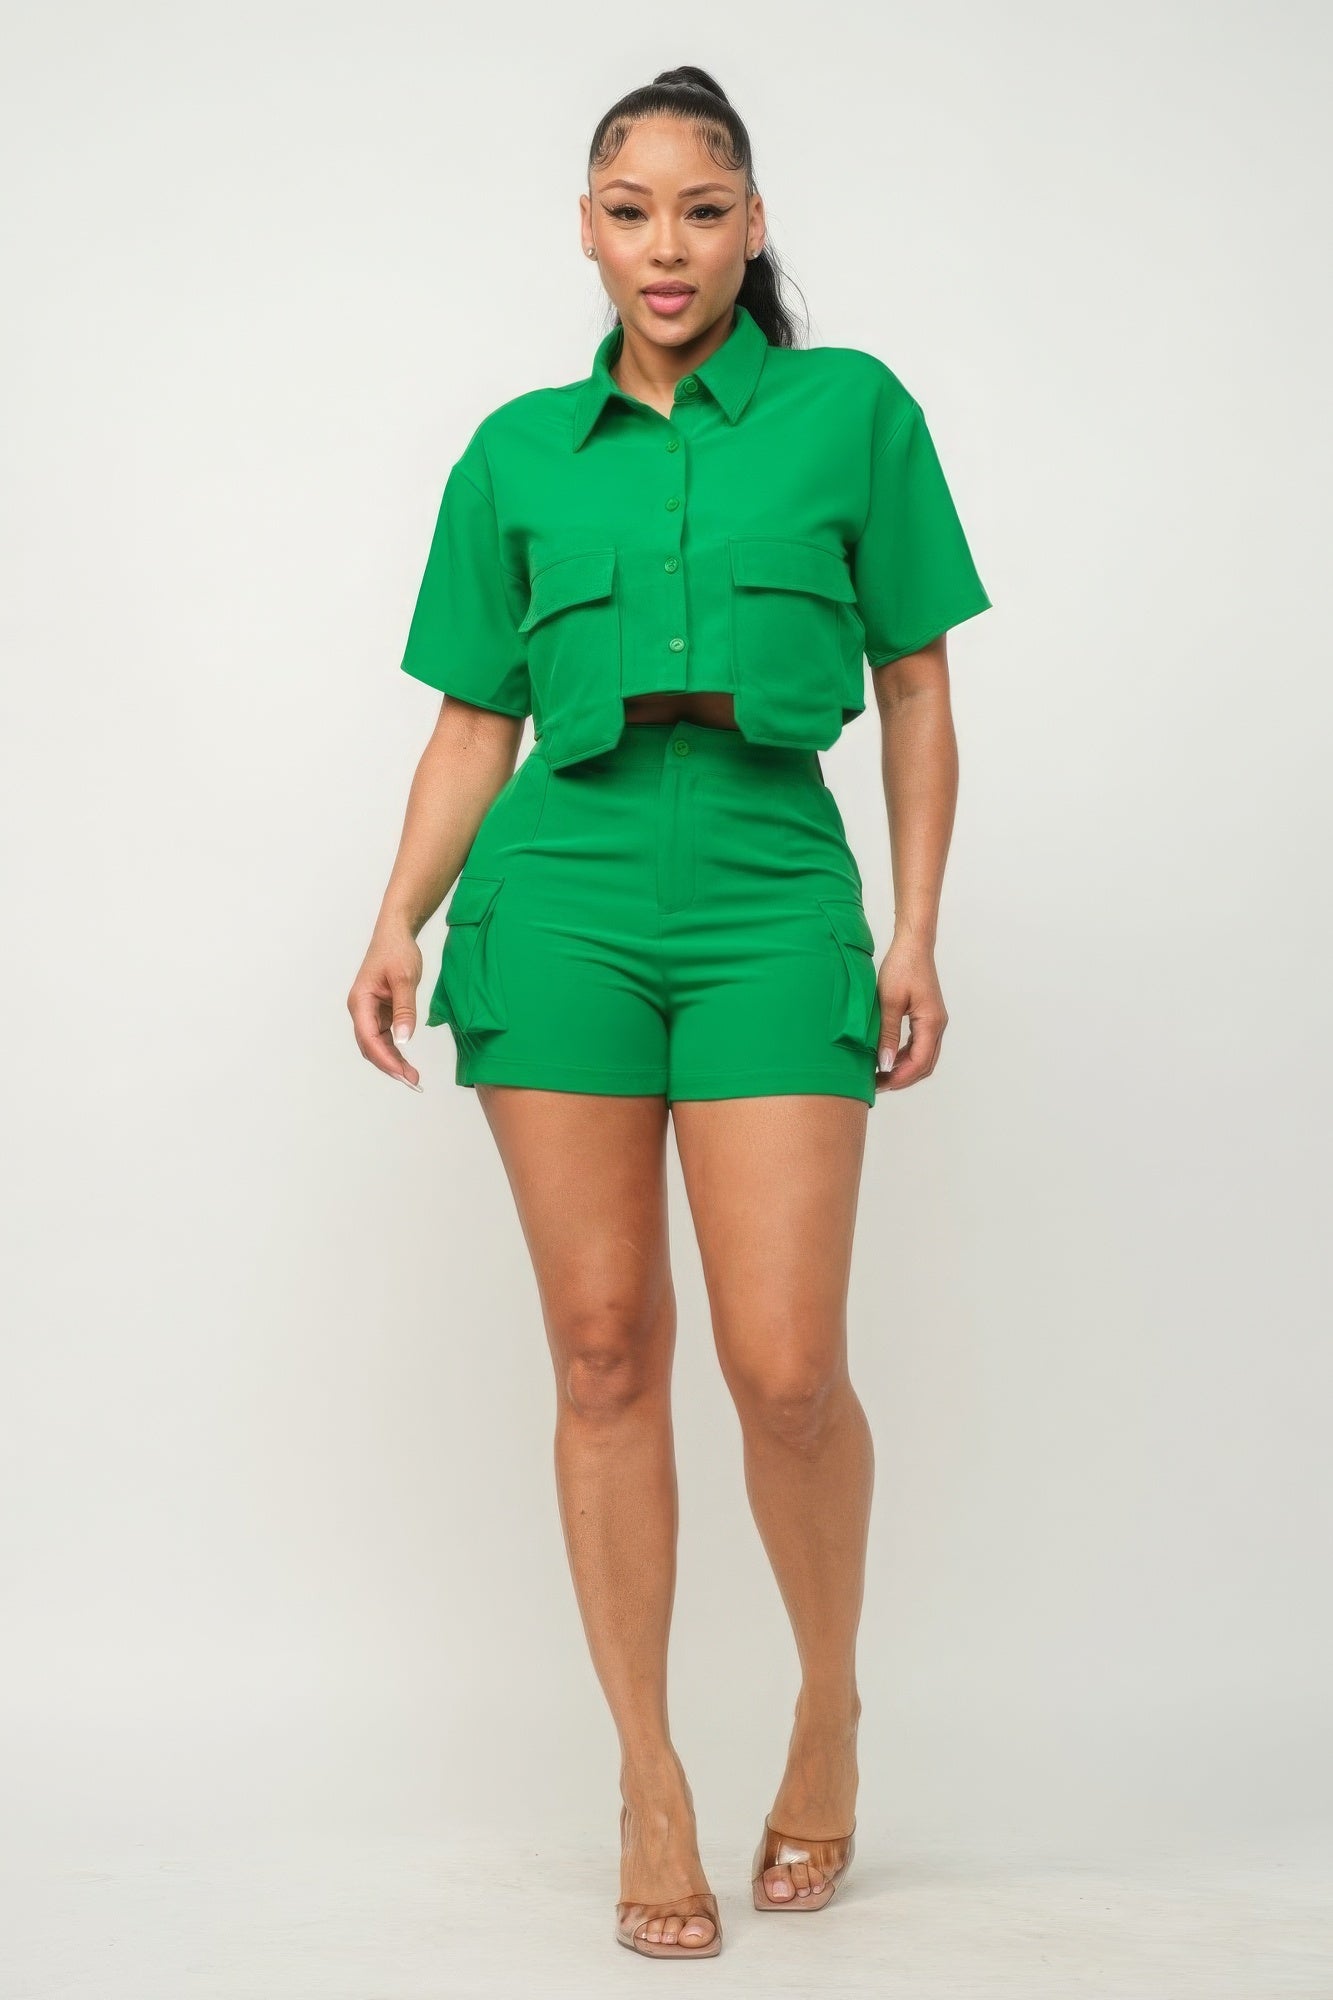 Front Button Down Side Pockets Top And Shorts Set | us.meeeshop